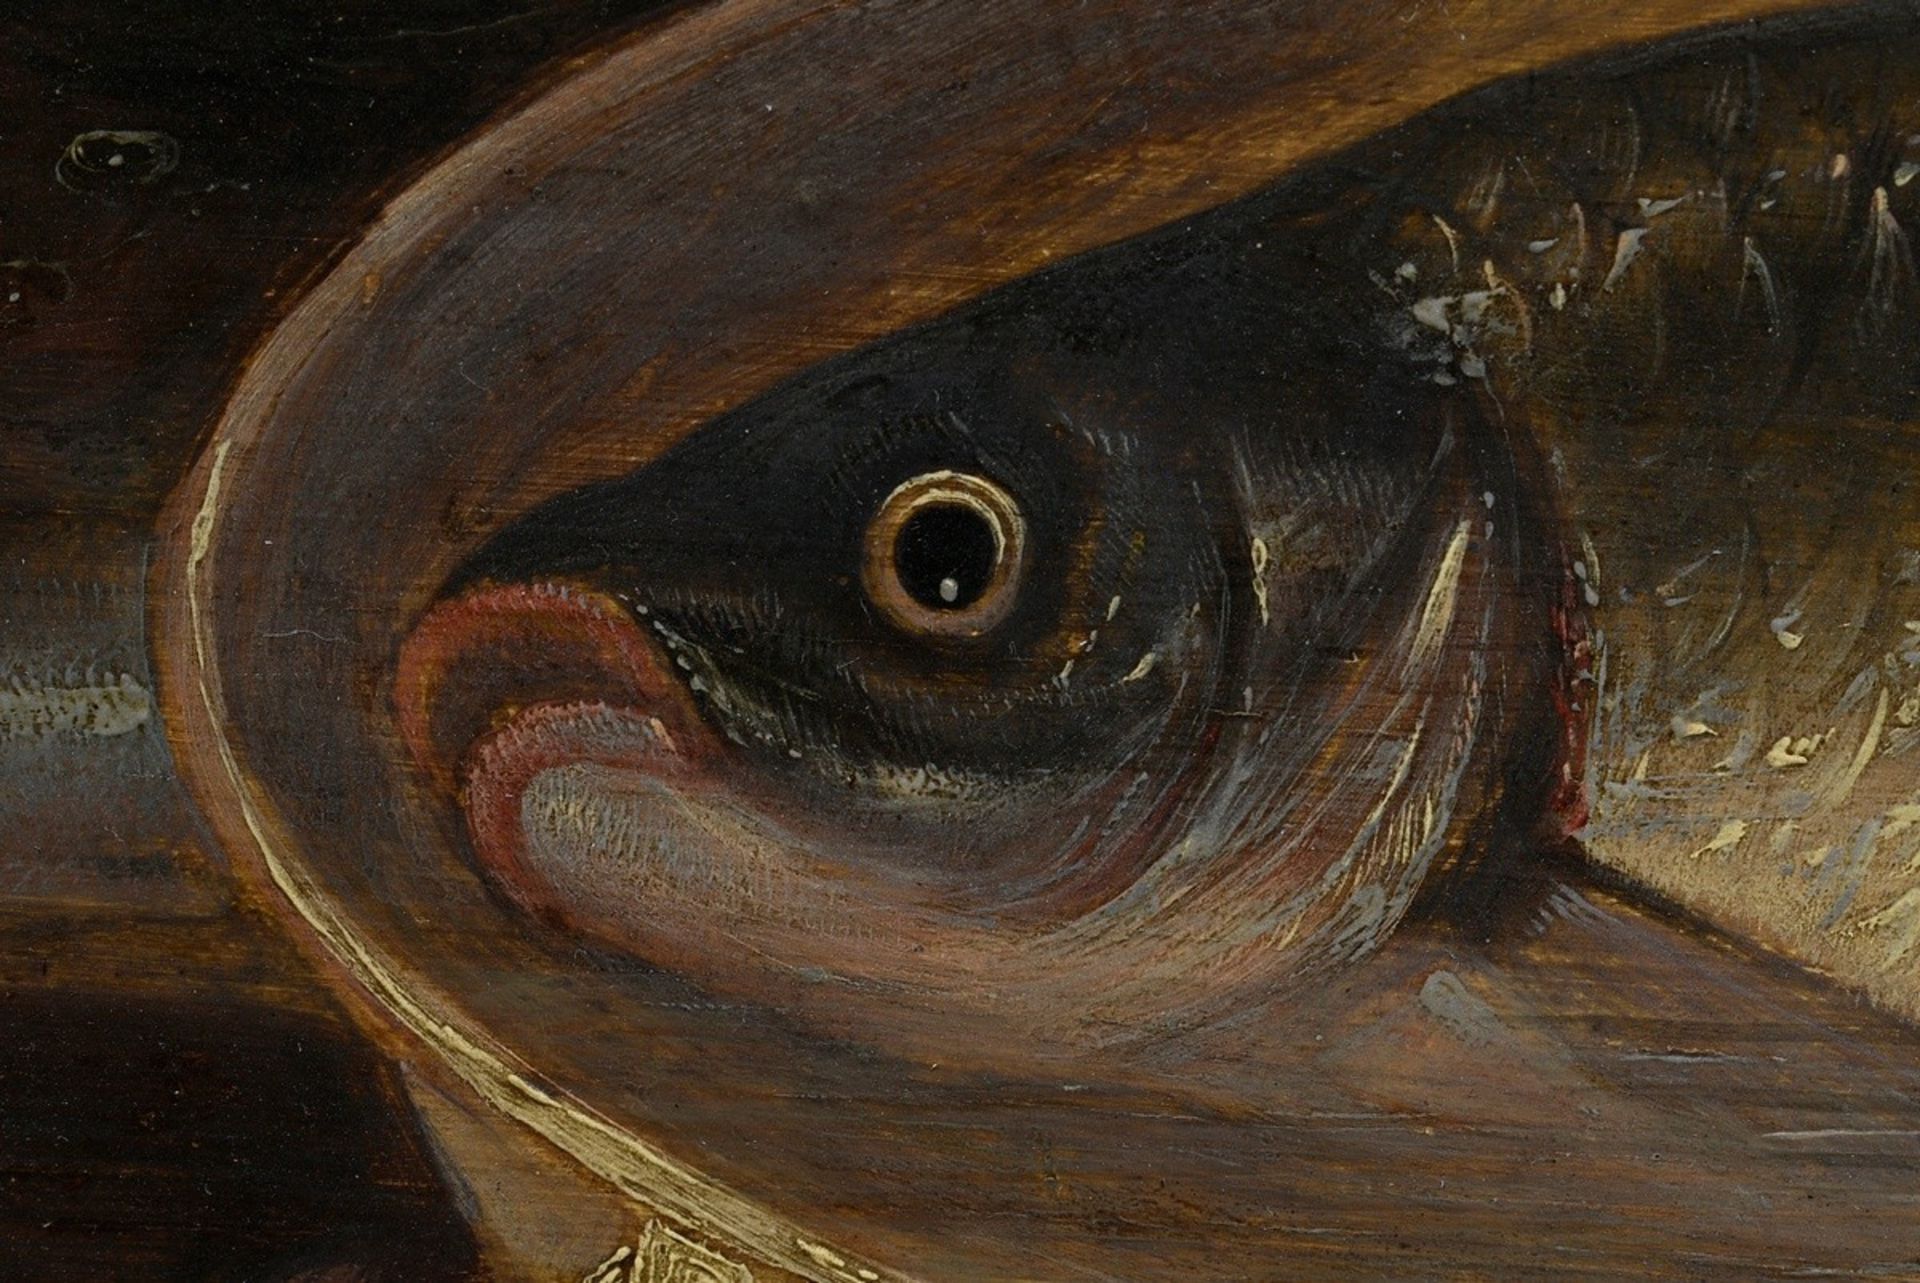 Monogramist F.V.L. (17th c.) "Fish Still Life with Cat", oil/wood, in the manner of Pieter van Bouc - Image 3 of 7